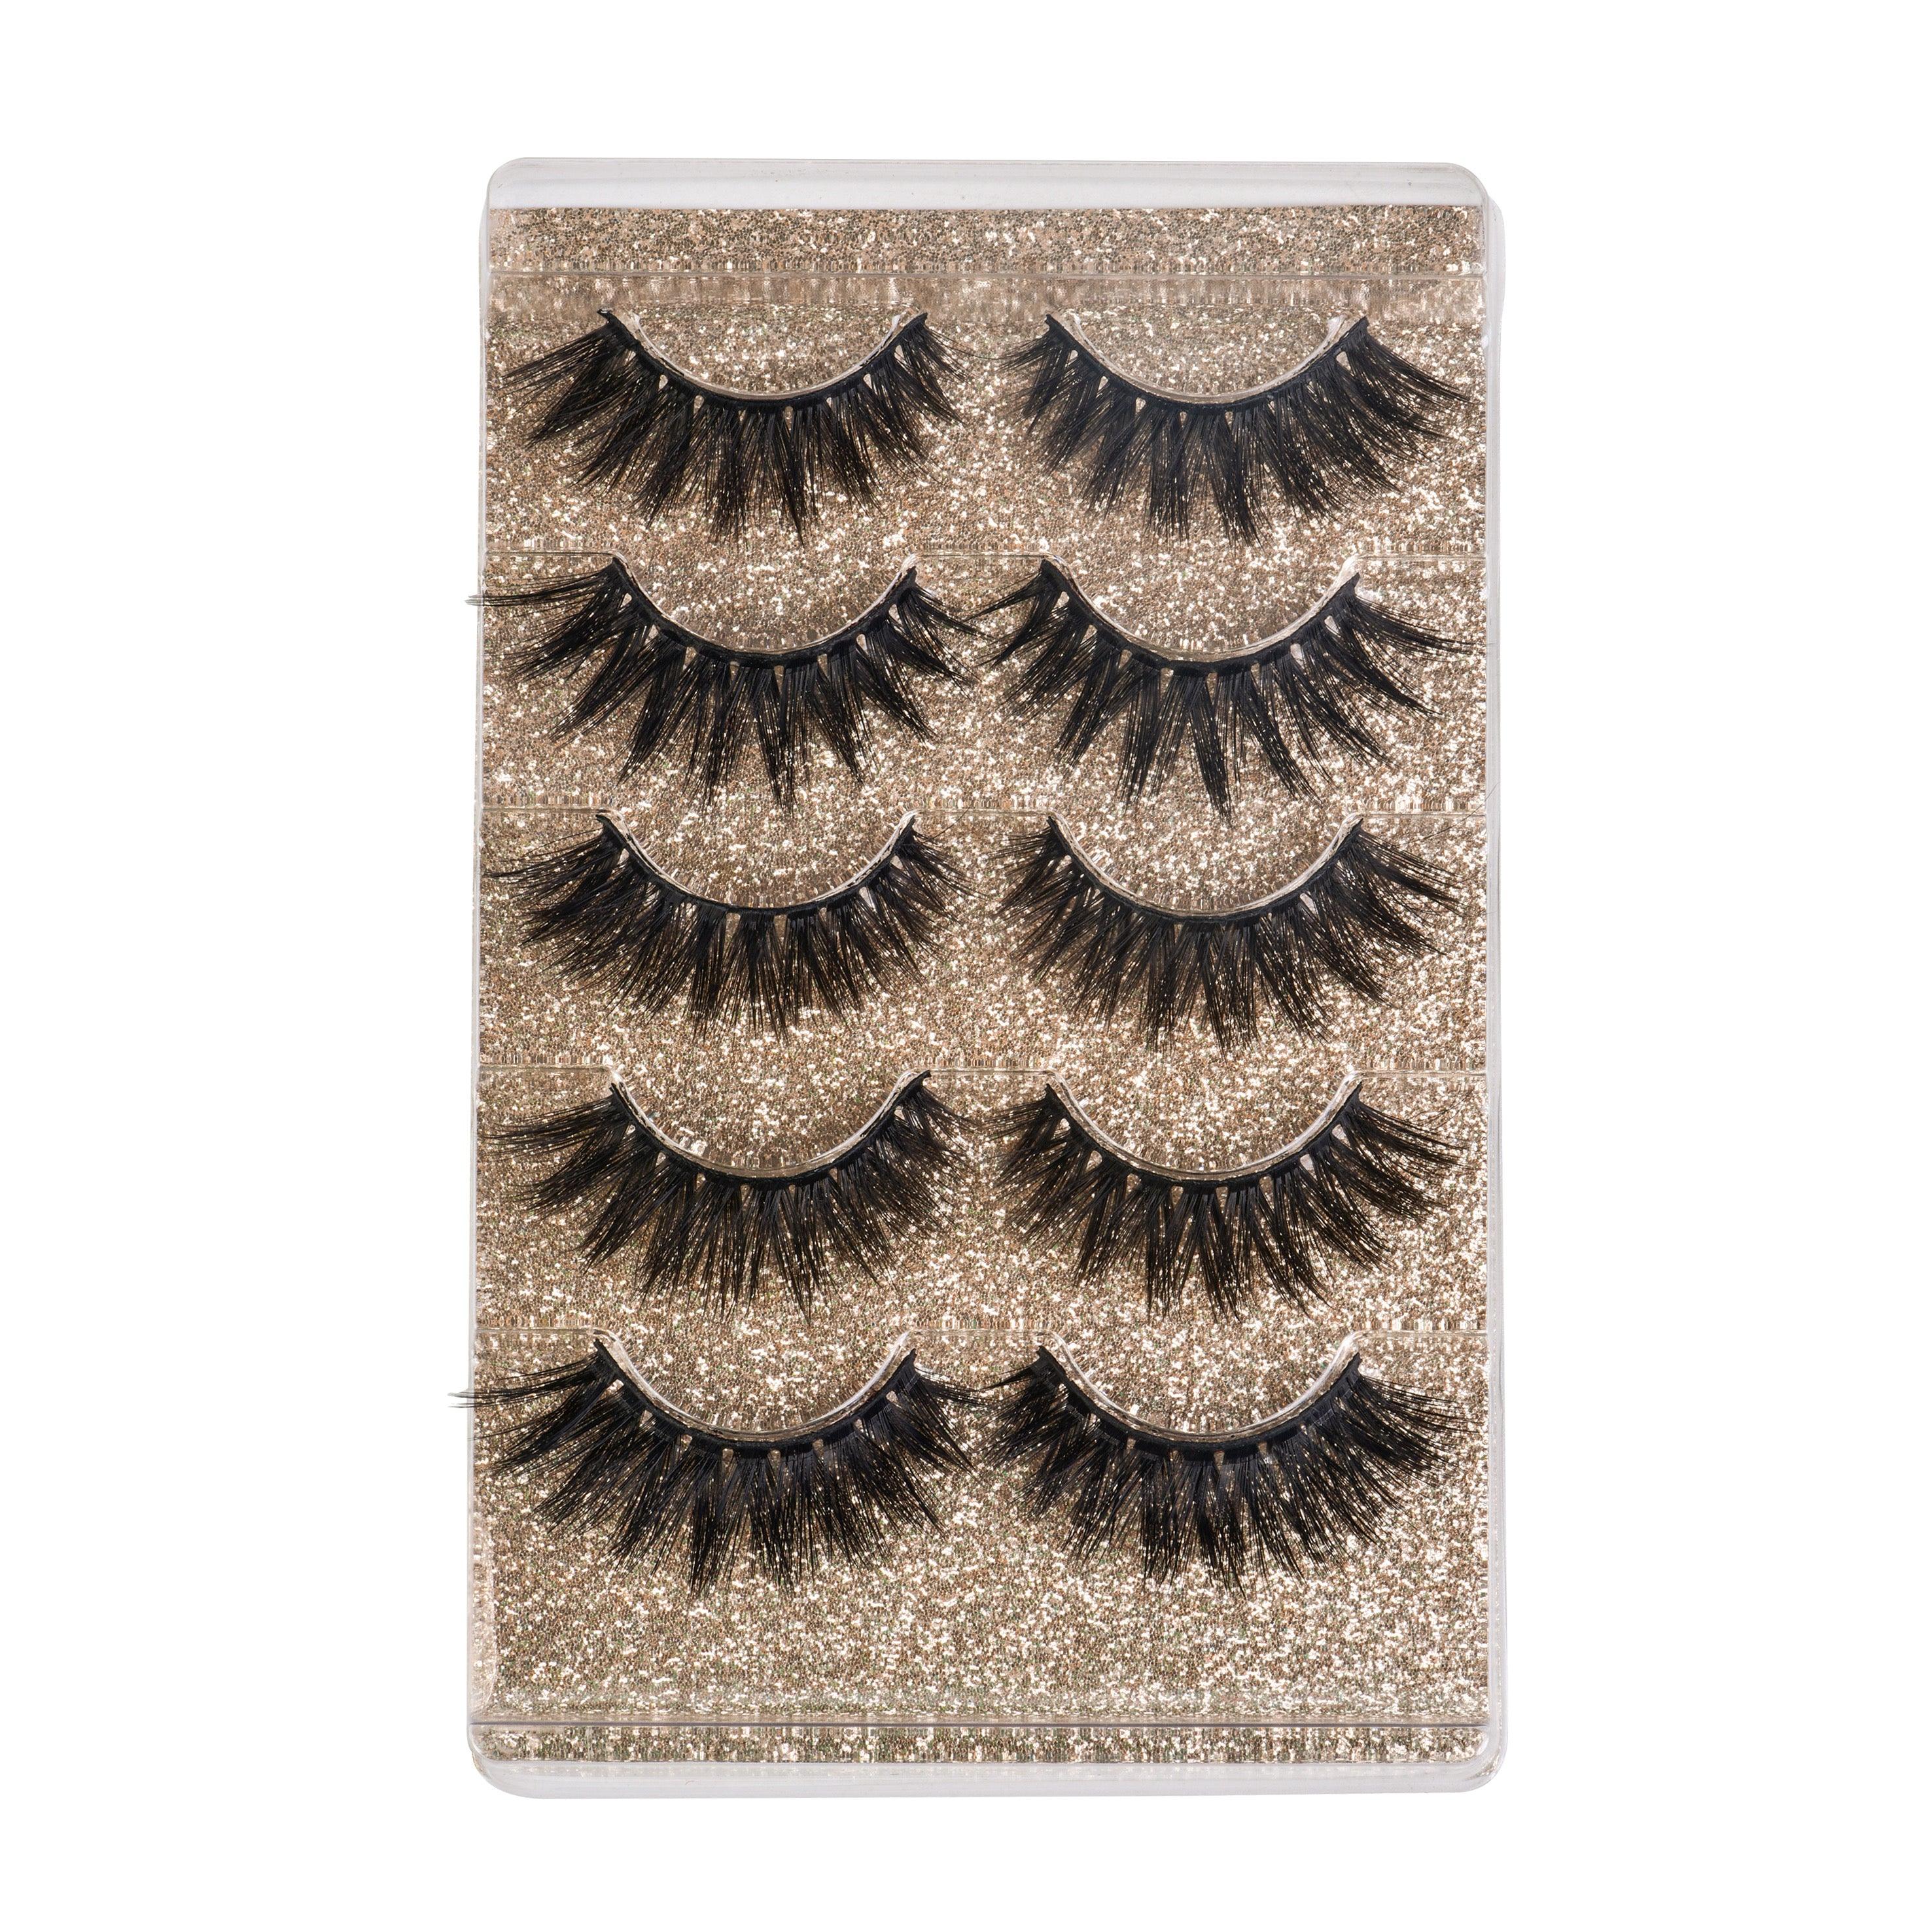 5 Pairs Majestic Lashes #4 (Pack of 6) - Miss Lil USA Wholesale